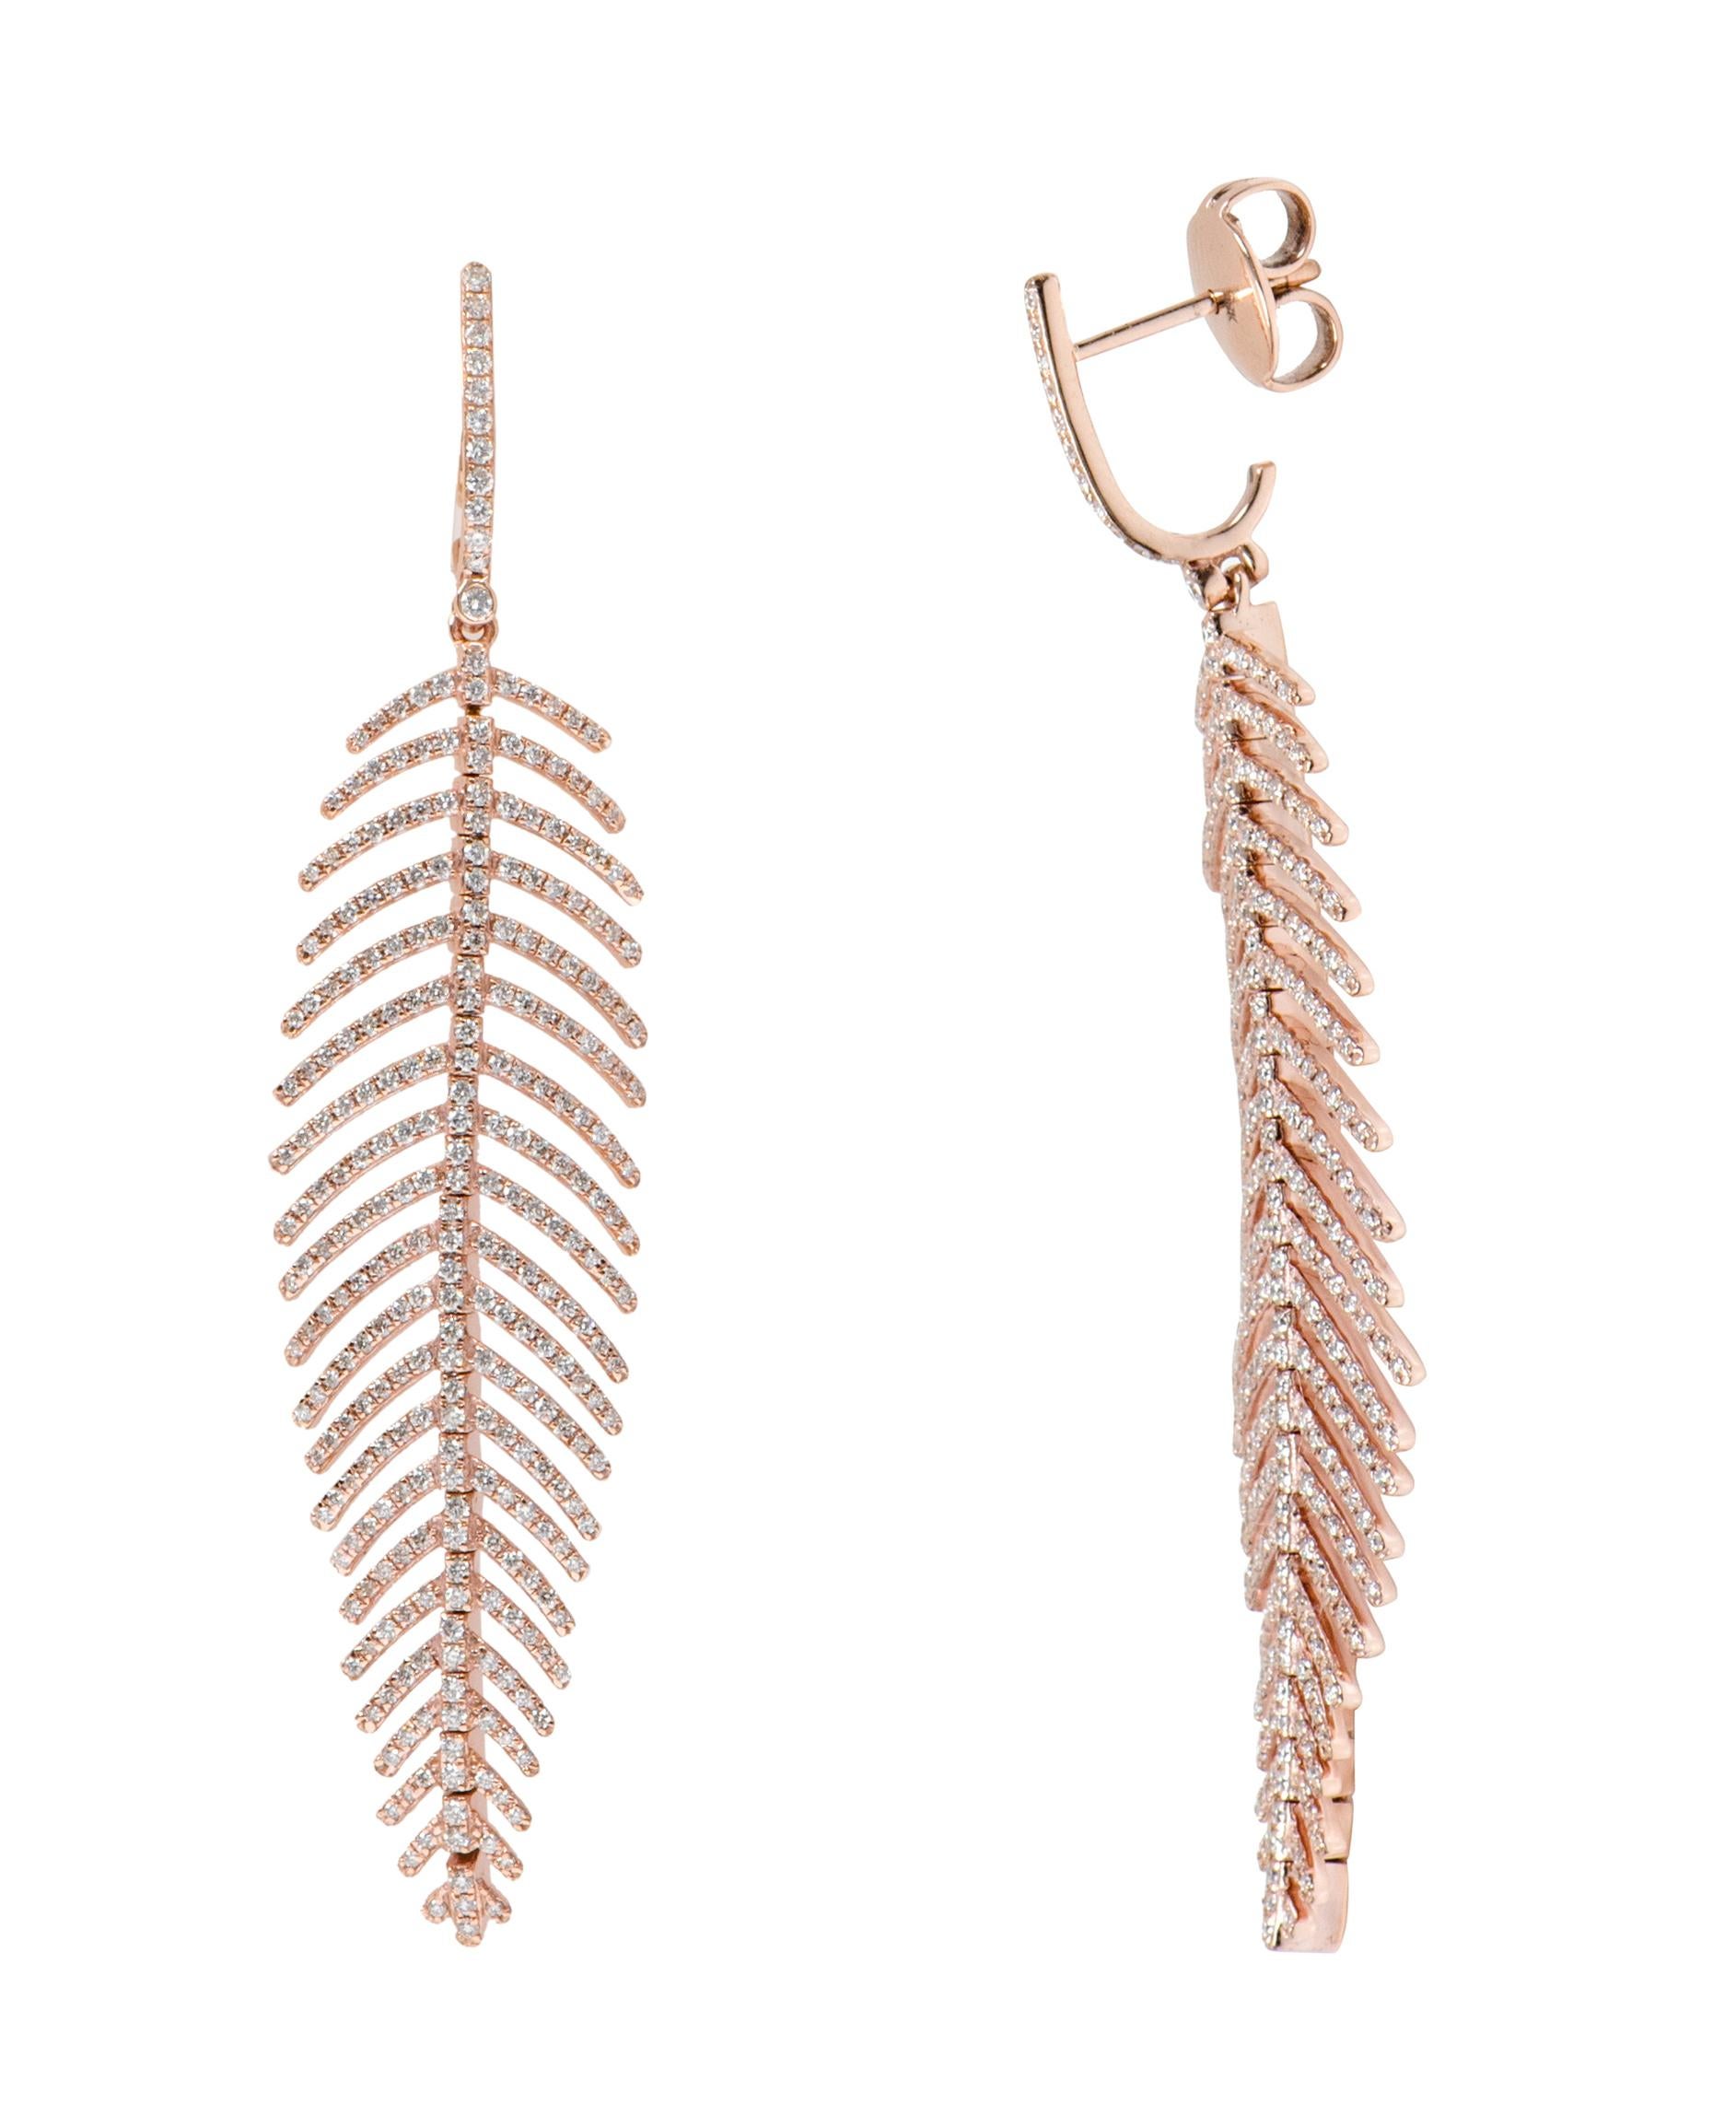 18 Karat Rose Gold 2.26 Carat Brilliant-Cut Diamond Leaf Drop Earrings

This immersive modern-style long diamond earring is glorious. It’s a pretty articulate open-leaf design with small pave set round diamonds on each leaf vein in the free-flowing